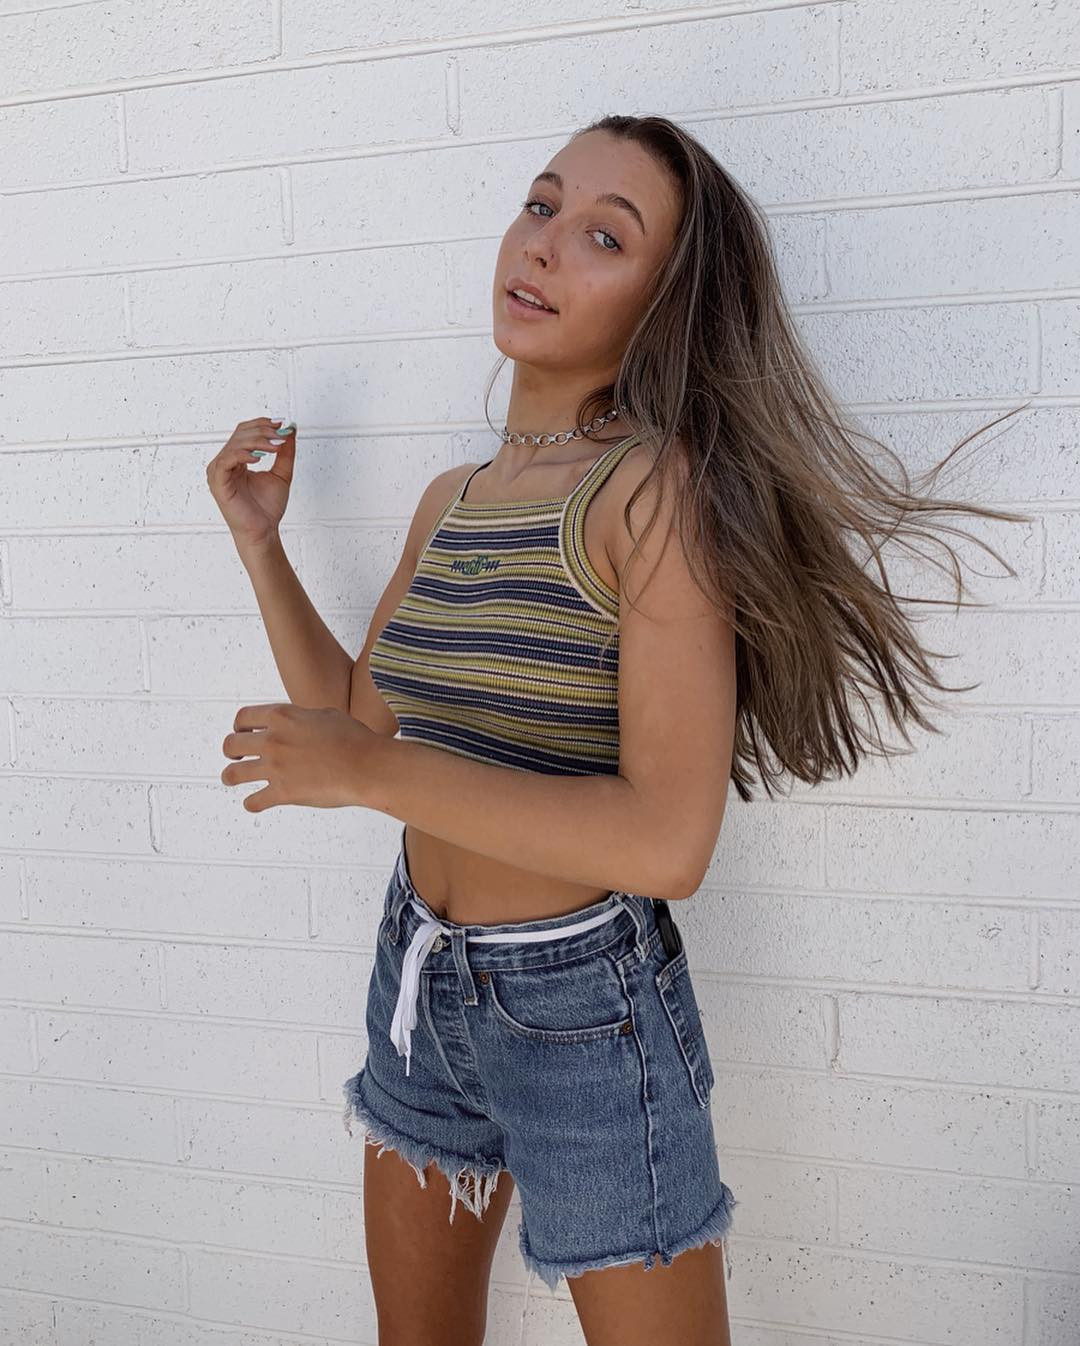 Emma Chamberlain Made This 3-Part Outfit Go Viral